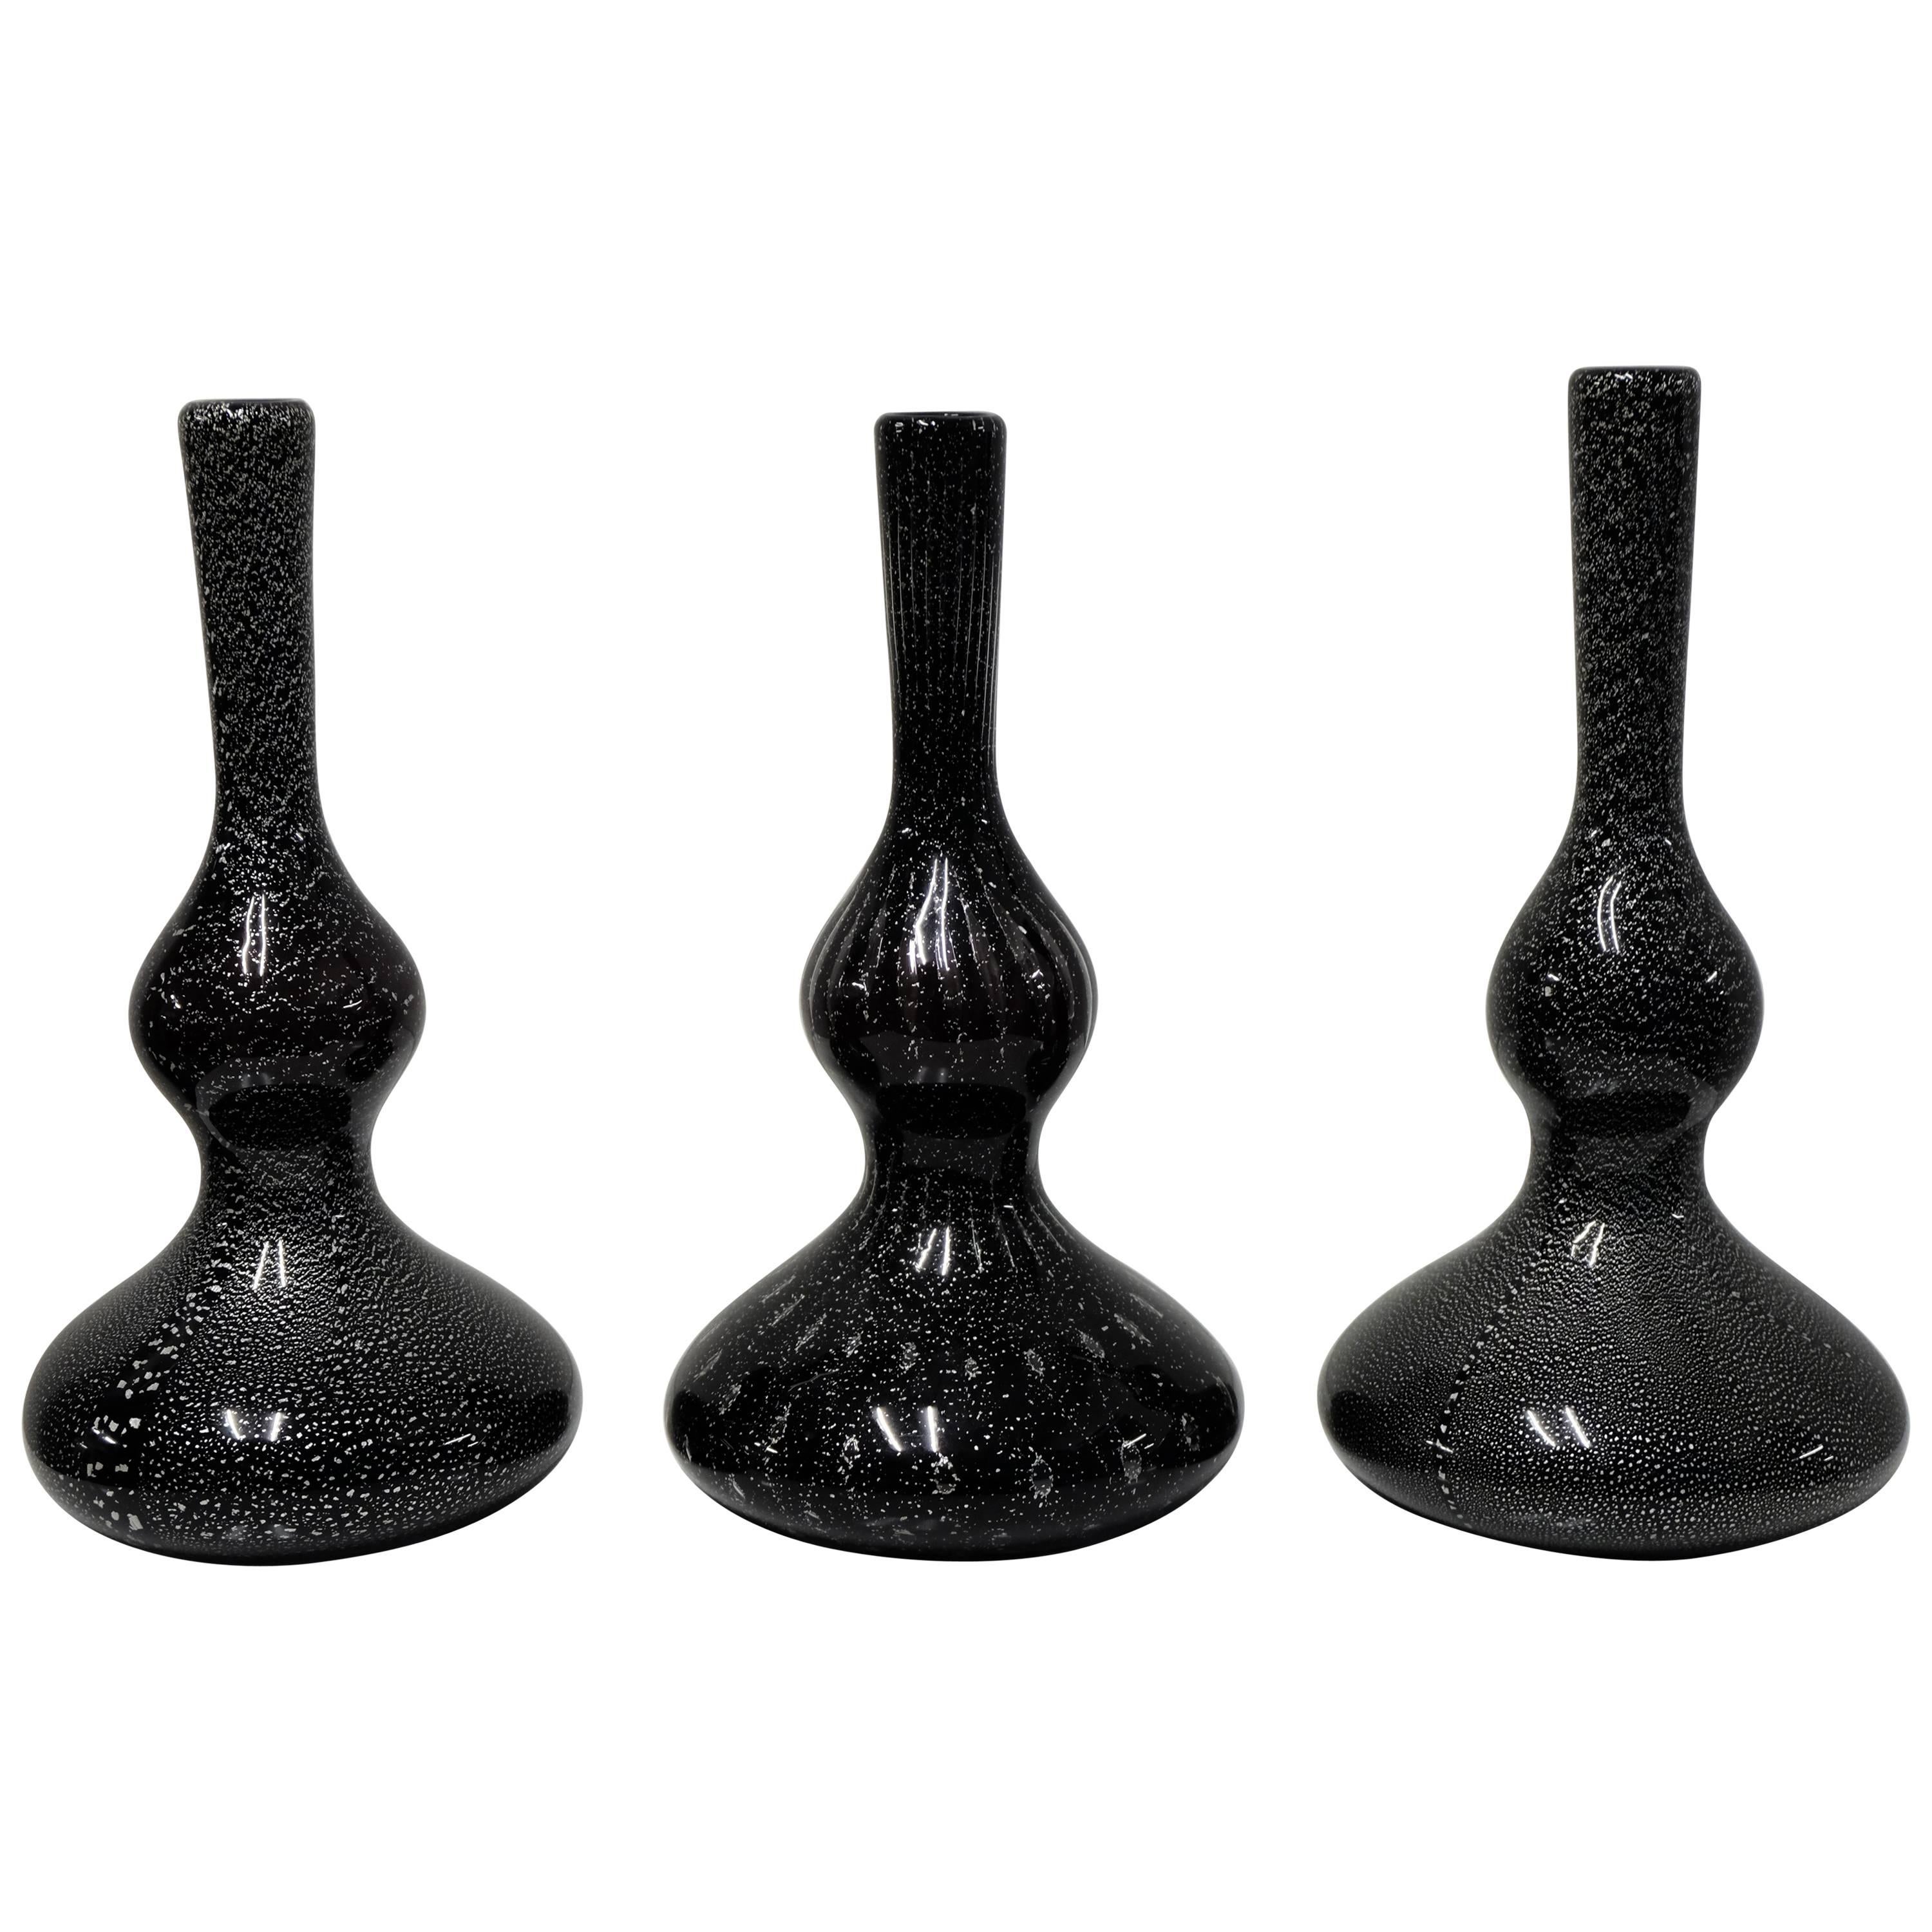 Murano Soliflor Vases by Christian Geissbuhler with Compania Vetraria Murano For Sale